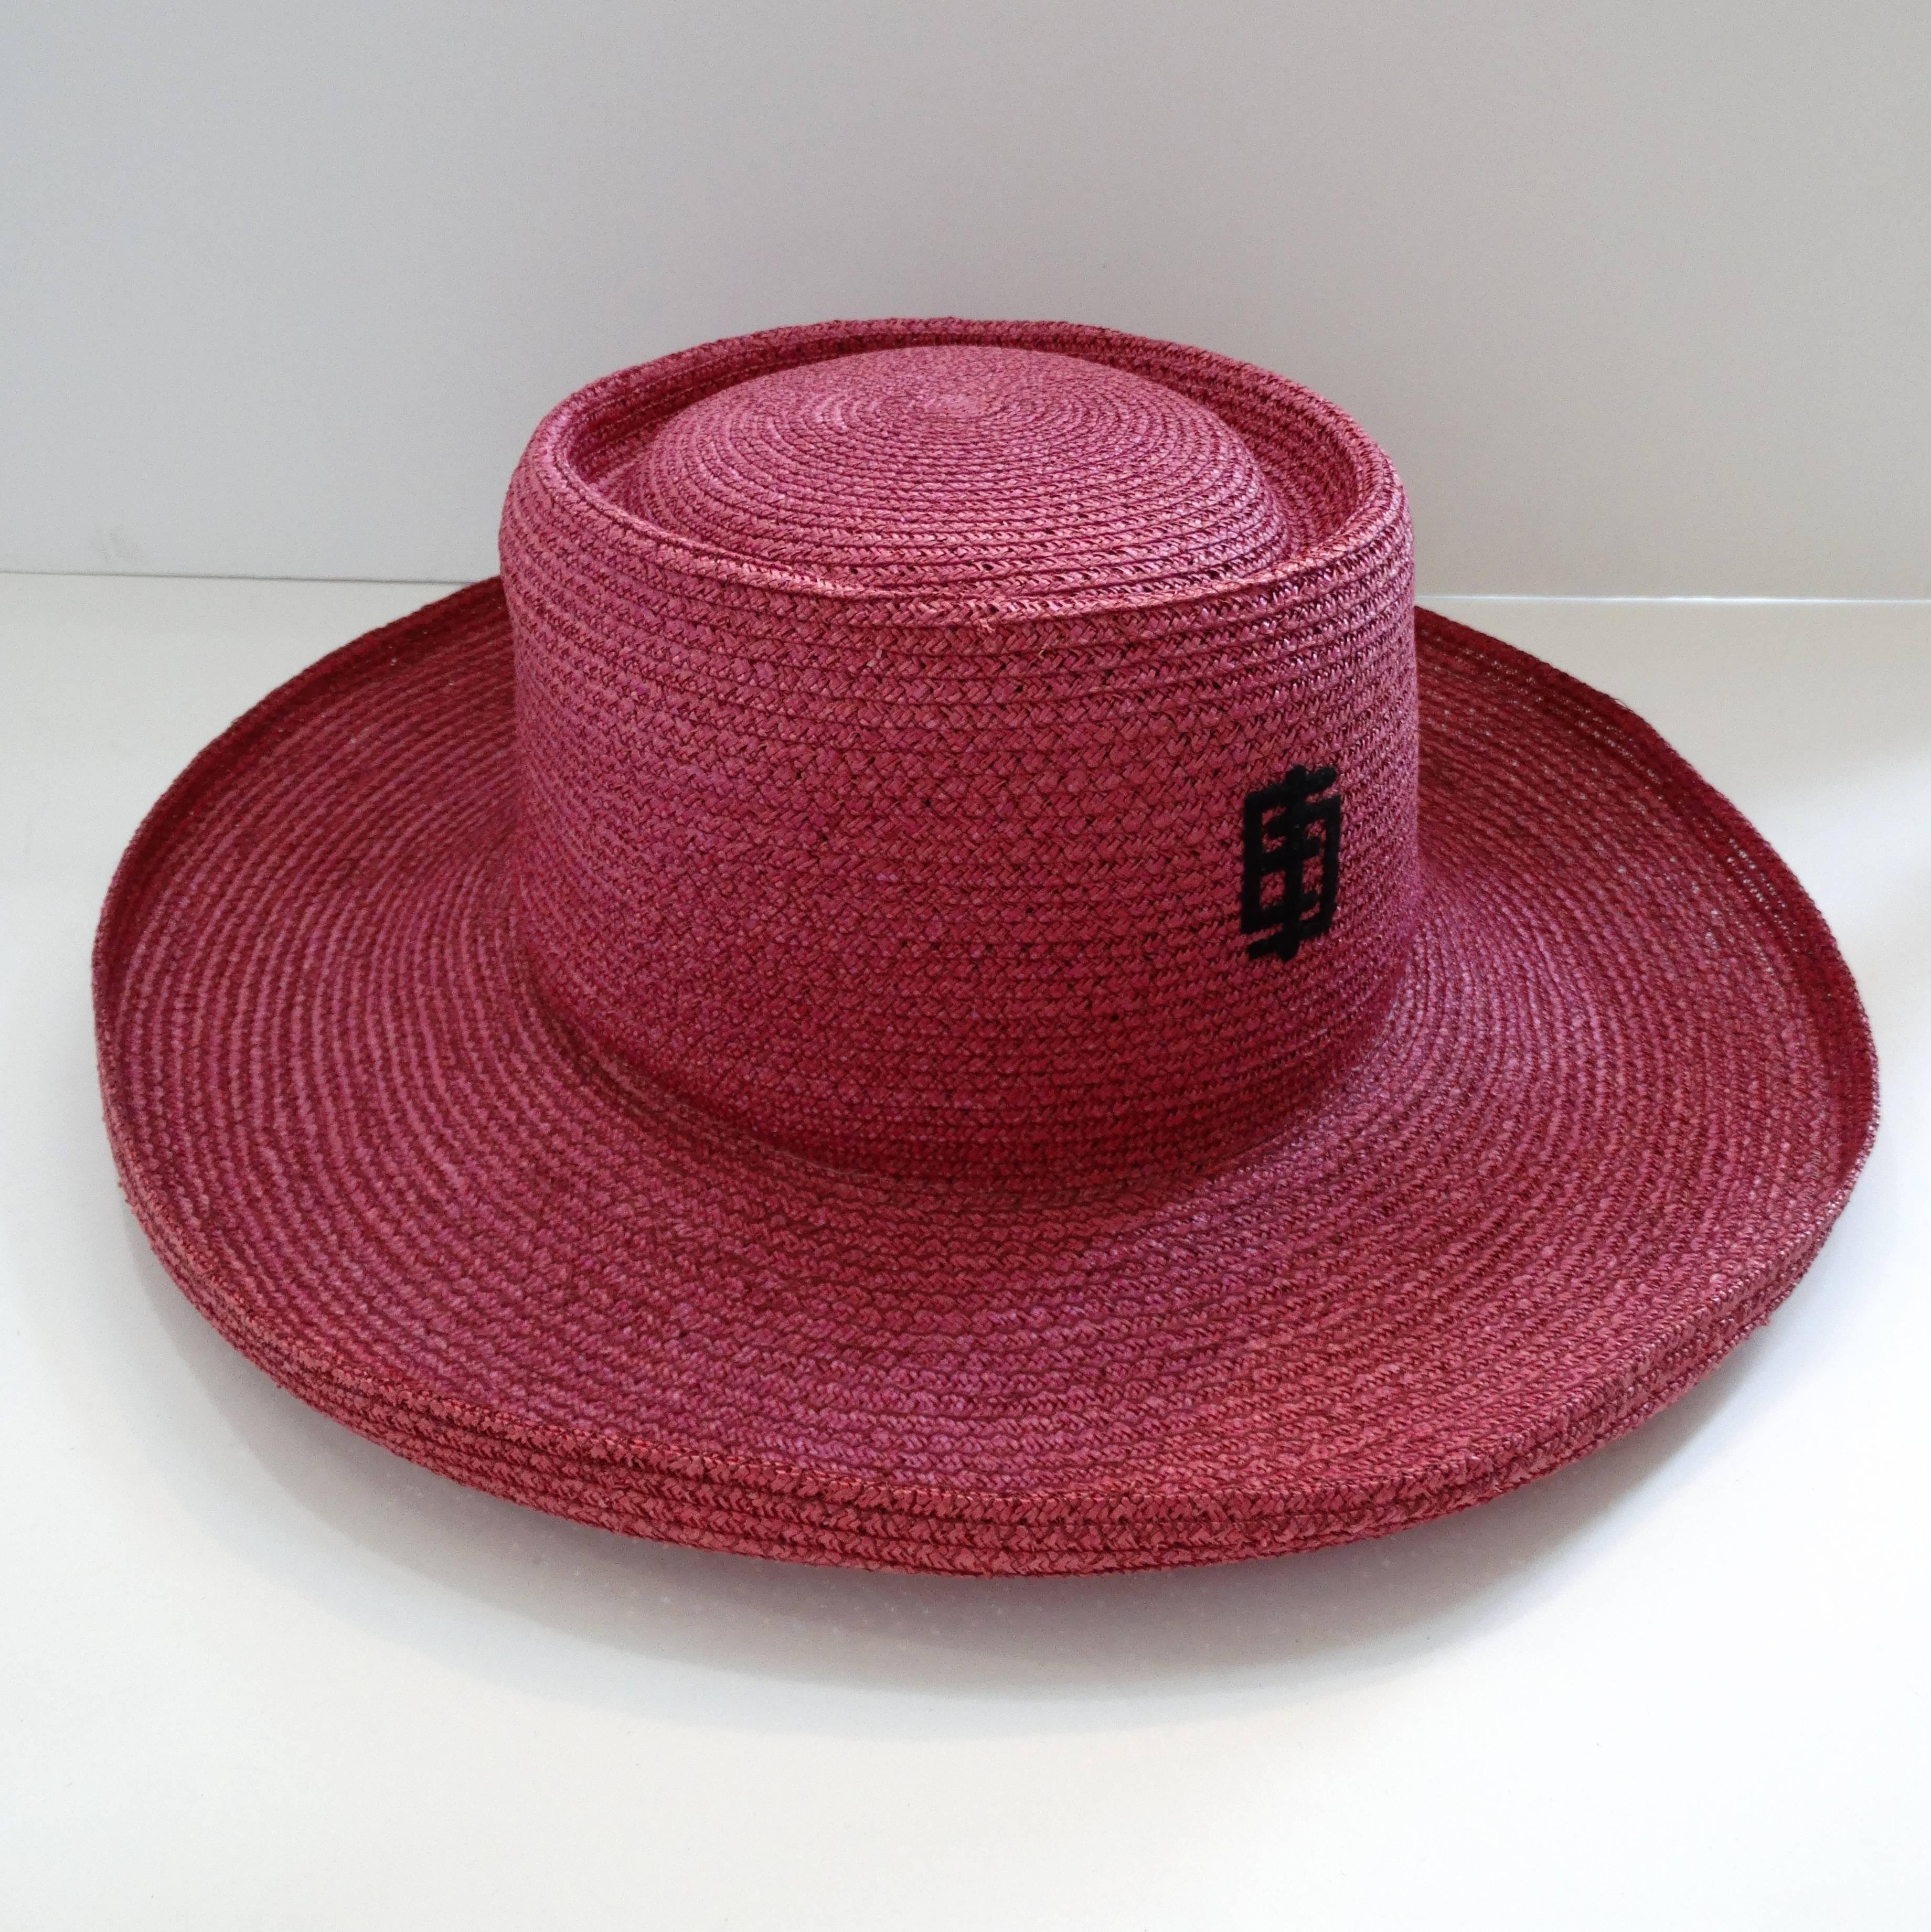 This amazing 1960s hat from designer Emilio Pucci is just the piece you need for resort wear 2018! Made of a woven raffia material, dyed a gorgeous shade of magenta! Boater style silhouette with flocked Emilio emblem on the front. Ribbon band on the